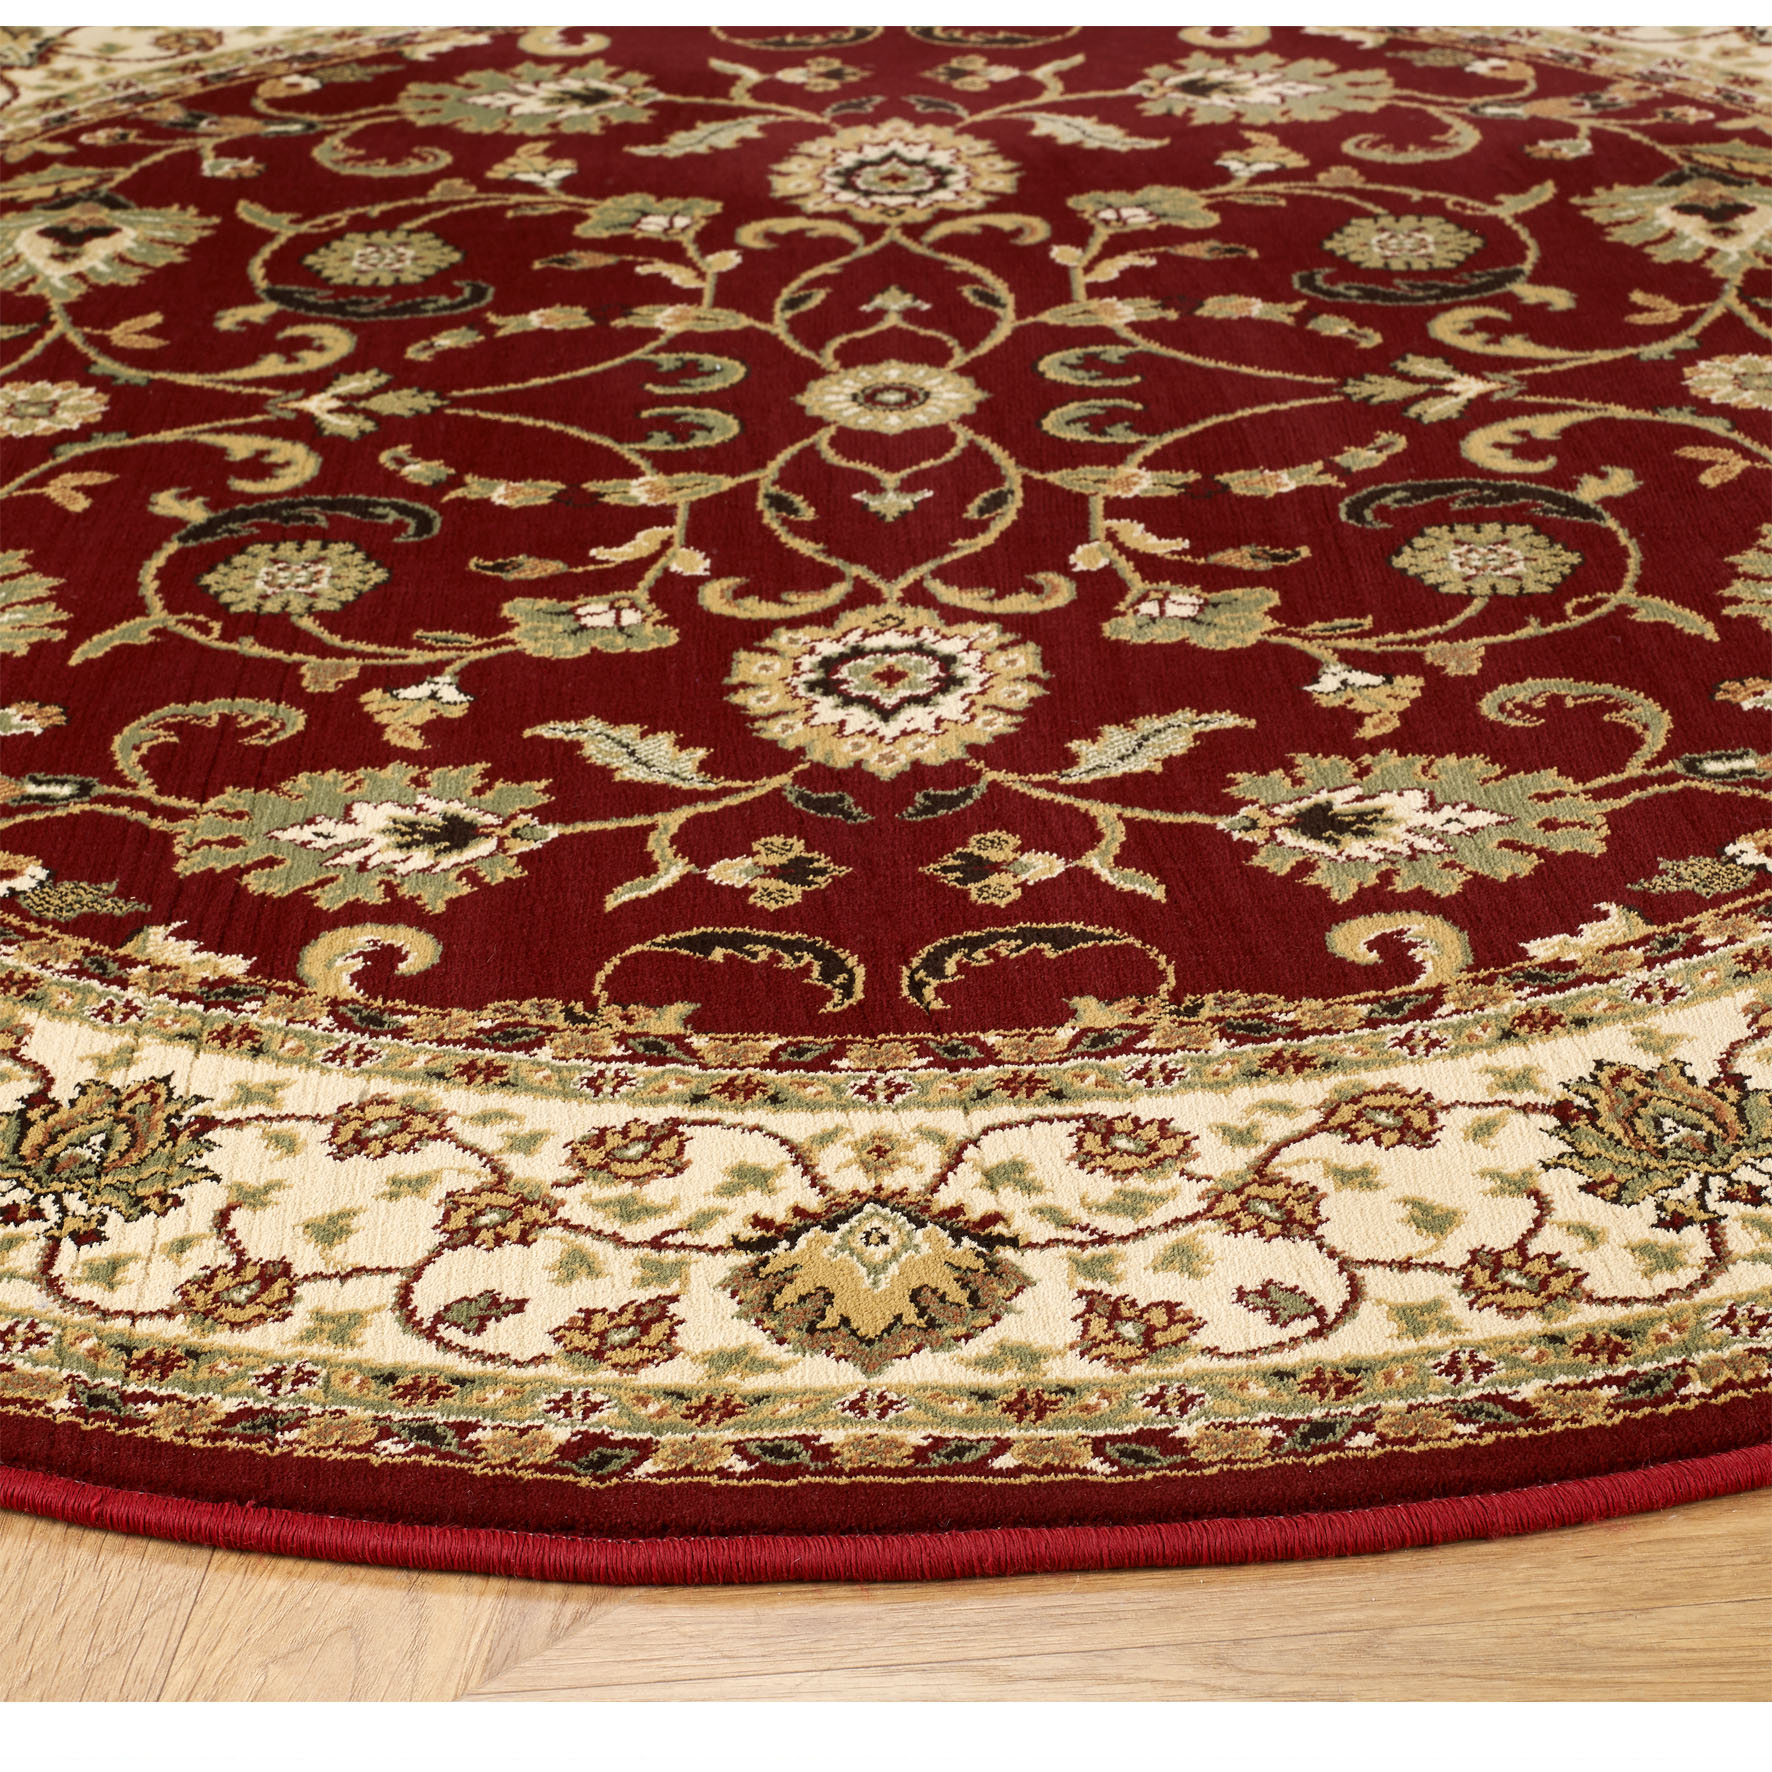 Kendra Traditional Circle Rug - 137R Red Gold